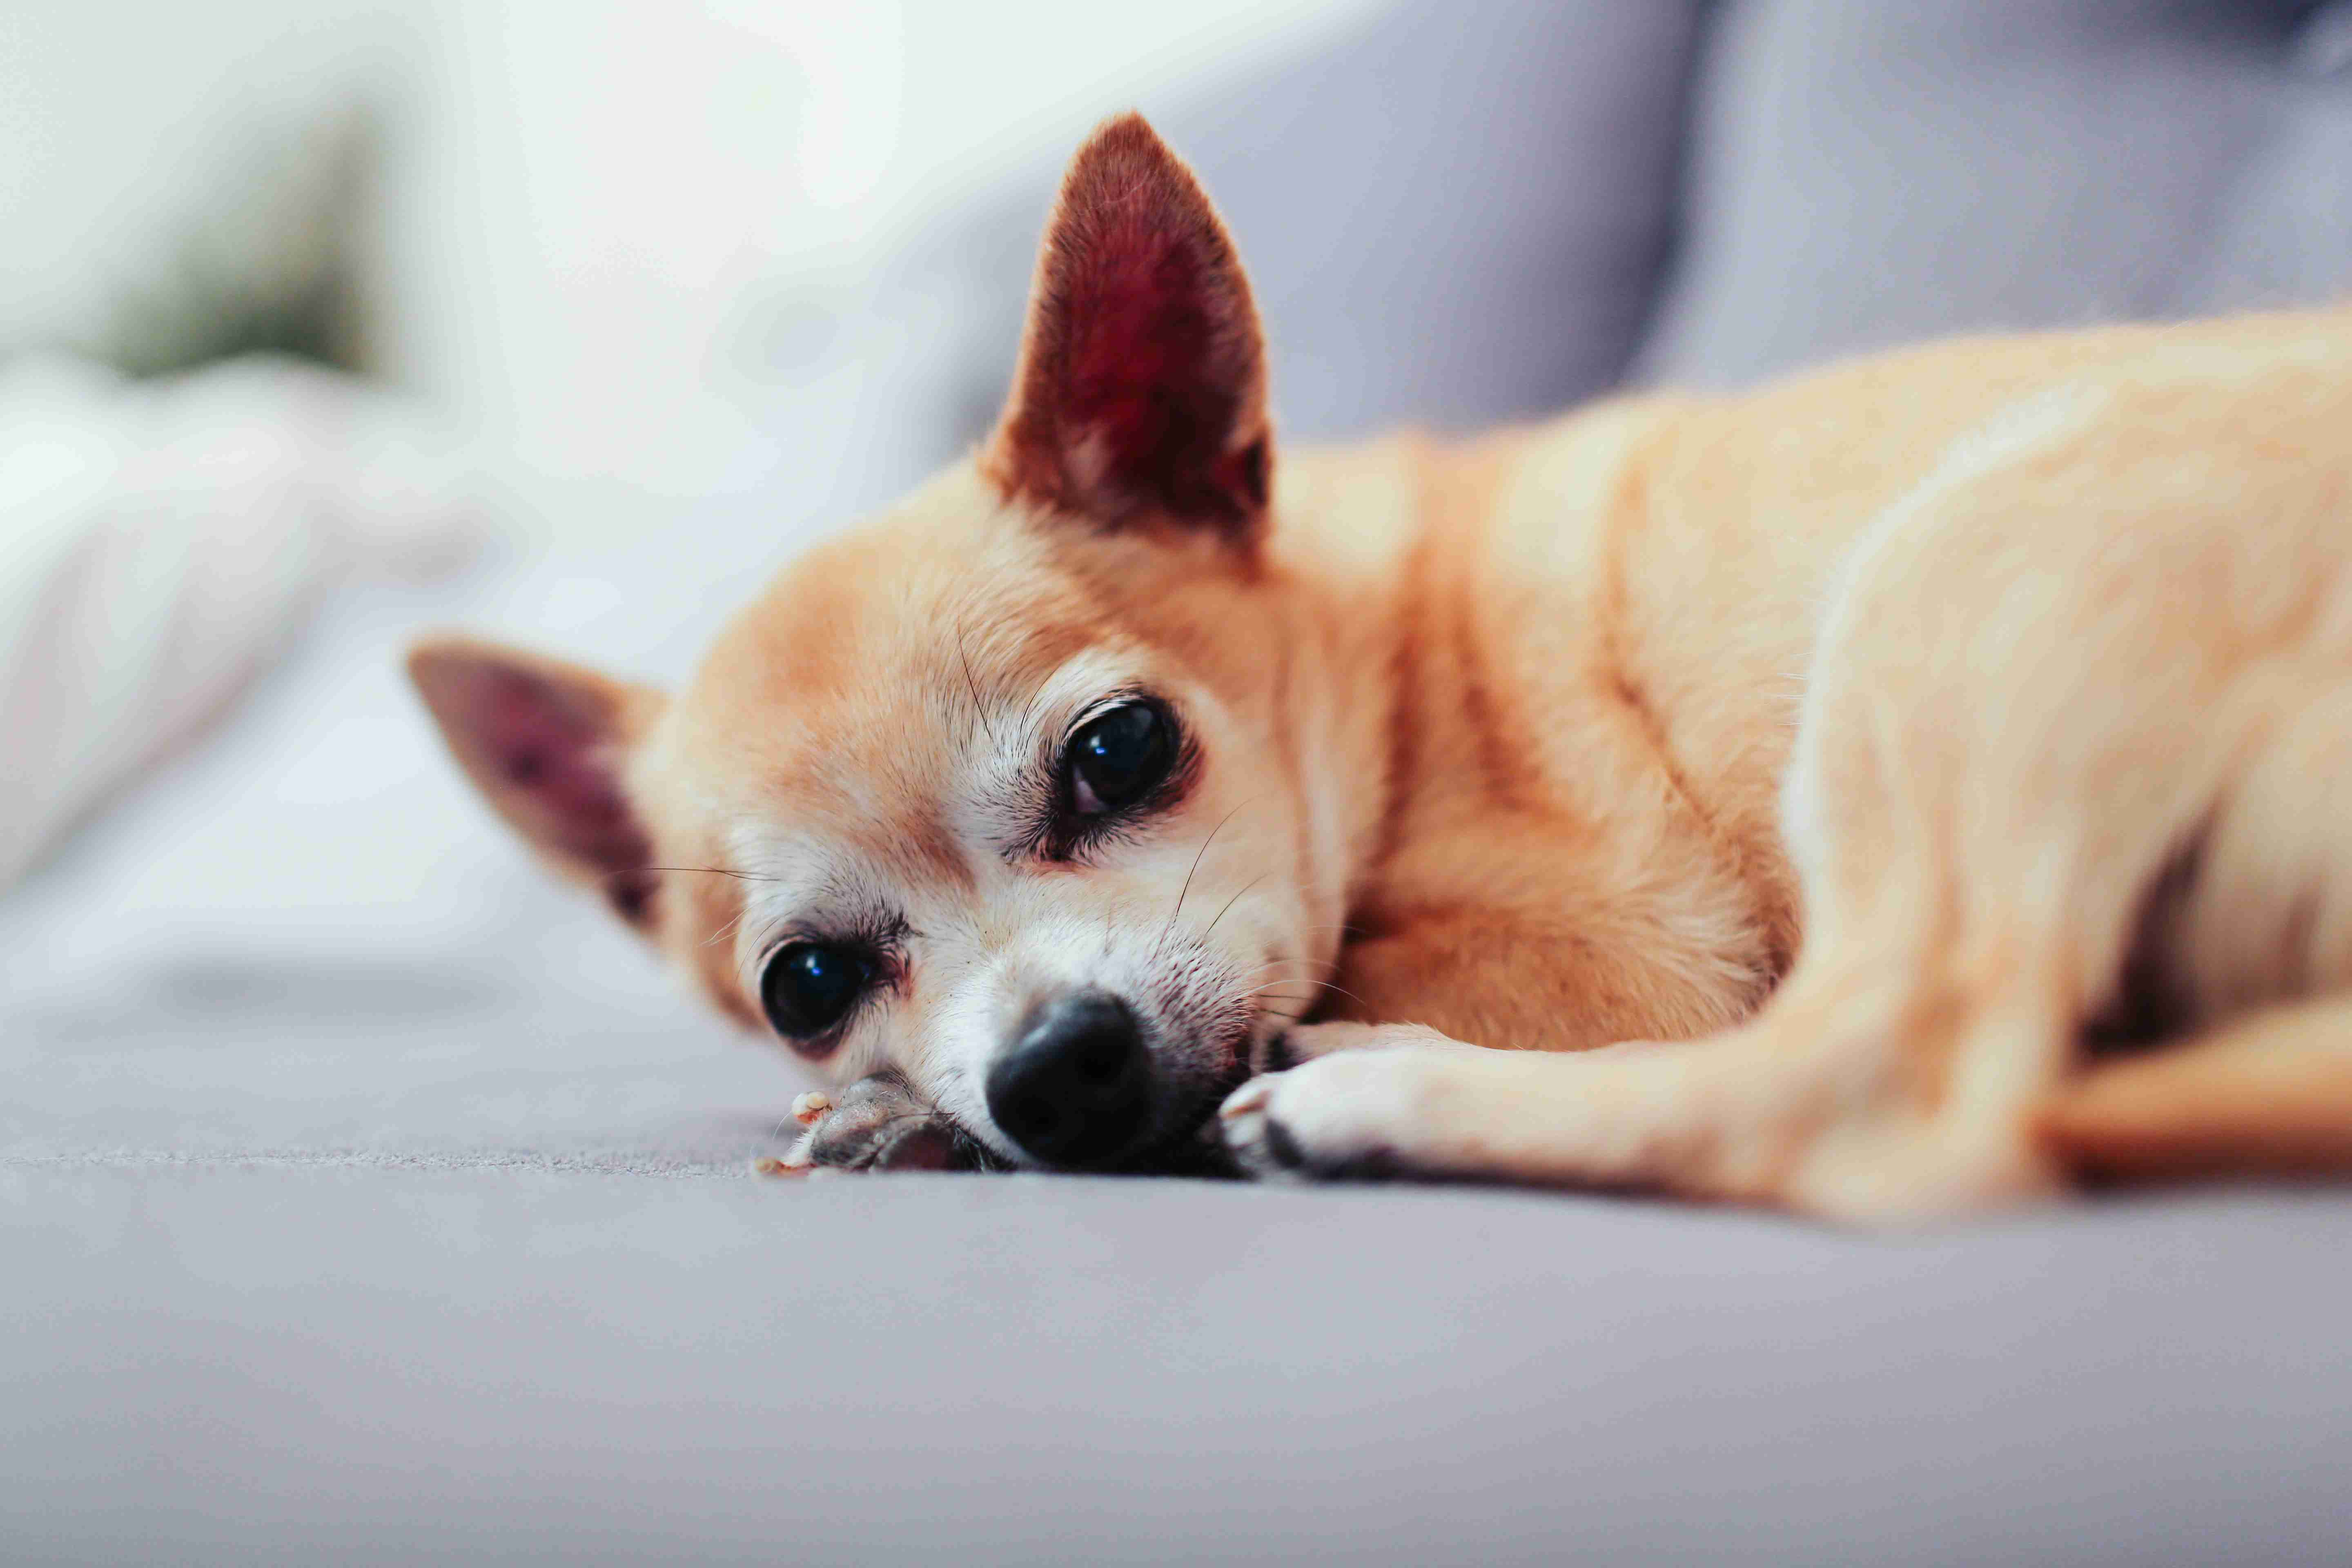 Can Chihuahuas become aggressive towards their owners if they are not properly trained or socialized?